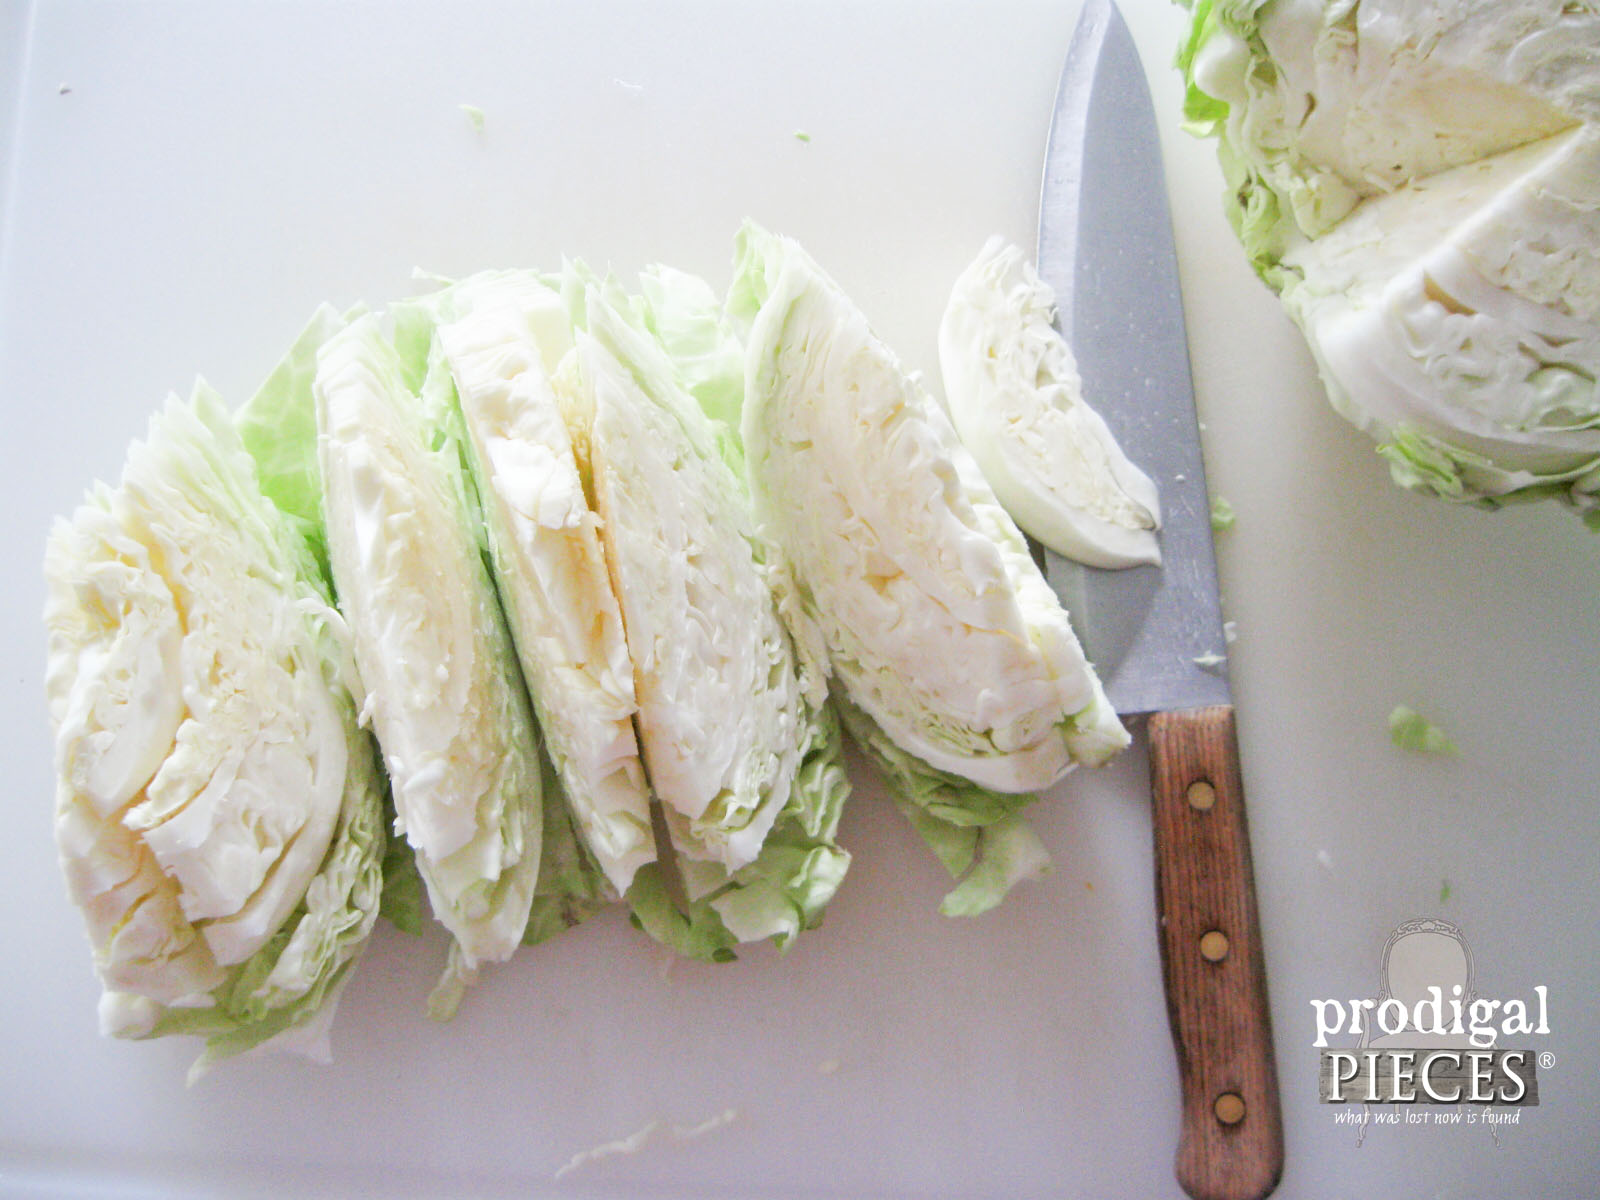 Chopping Cabbage for Skillet Pizza | Prodigal Pieces | www.prodigalpieces.com